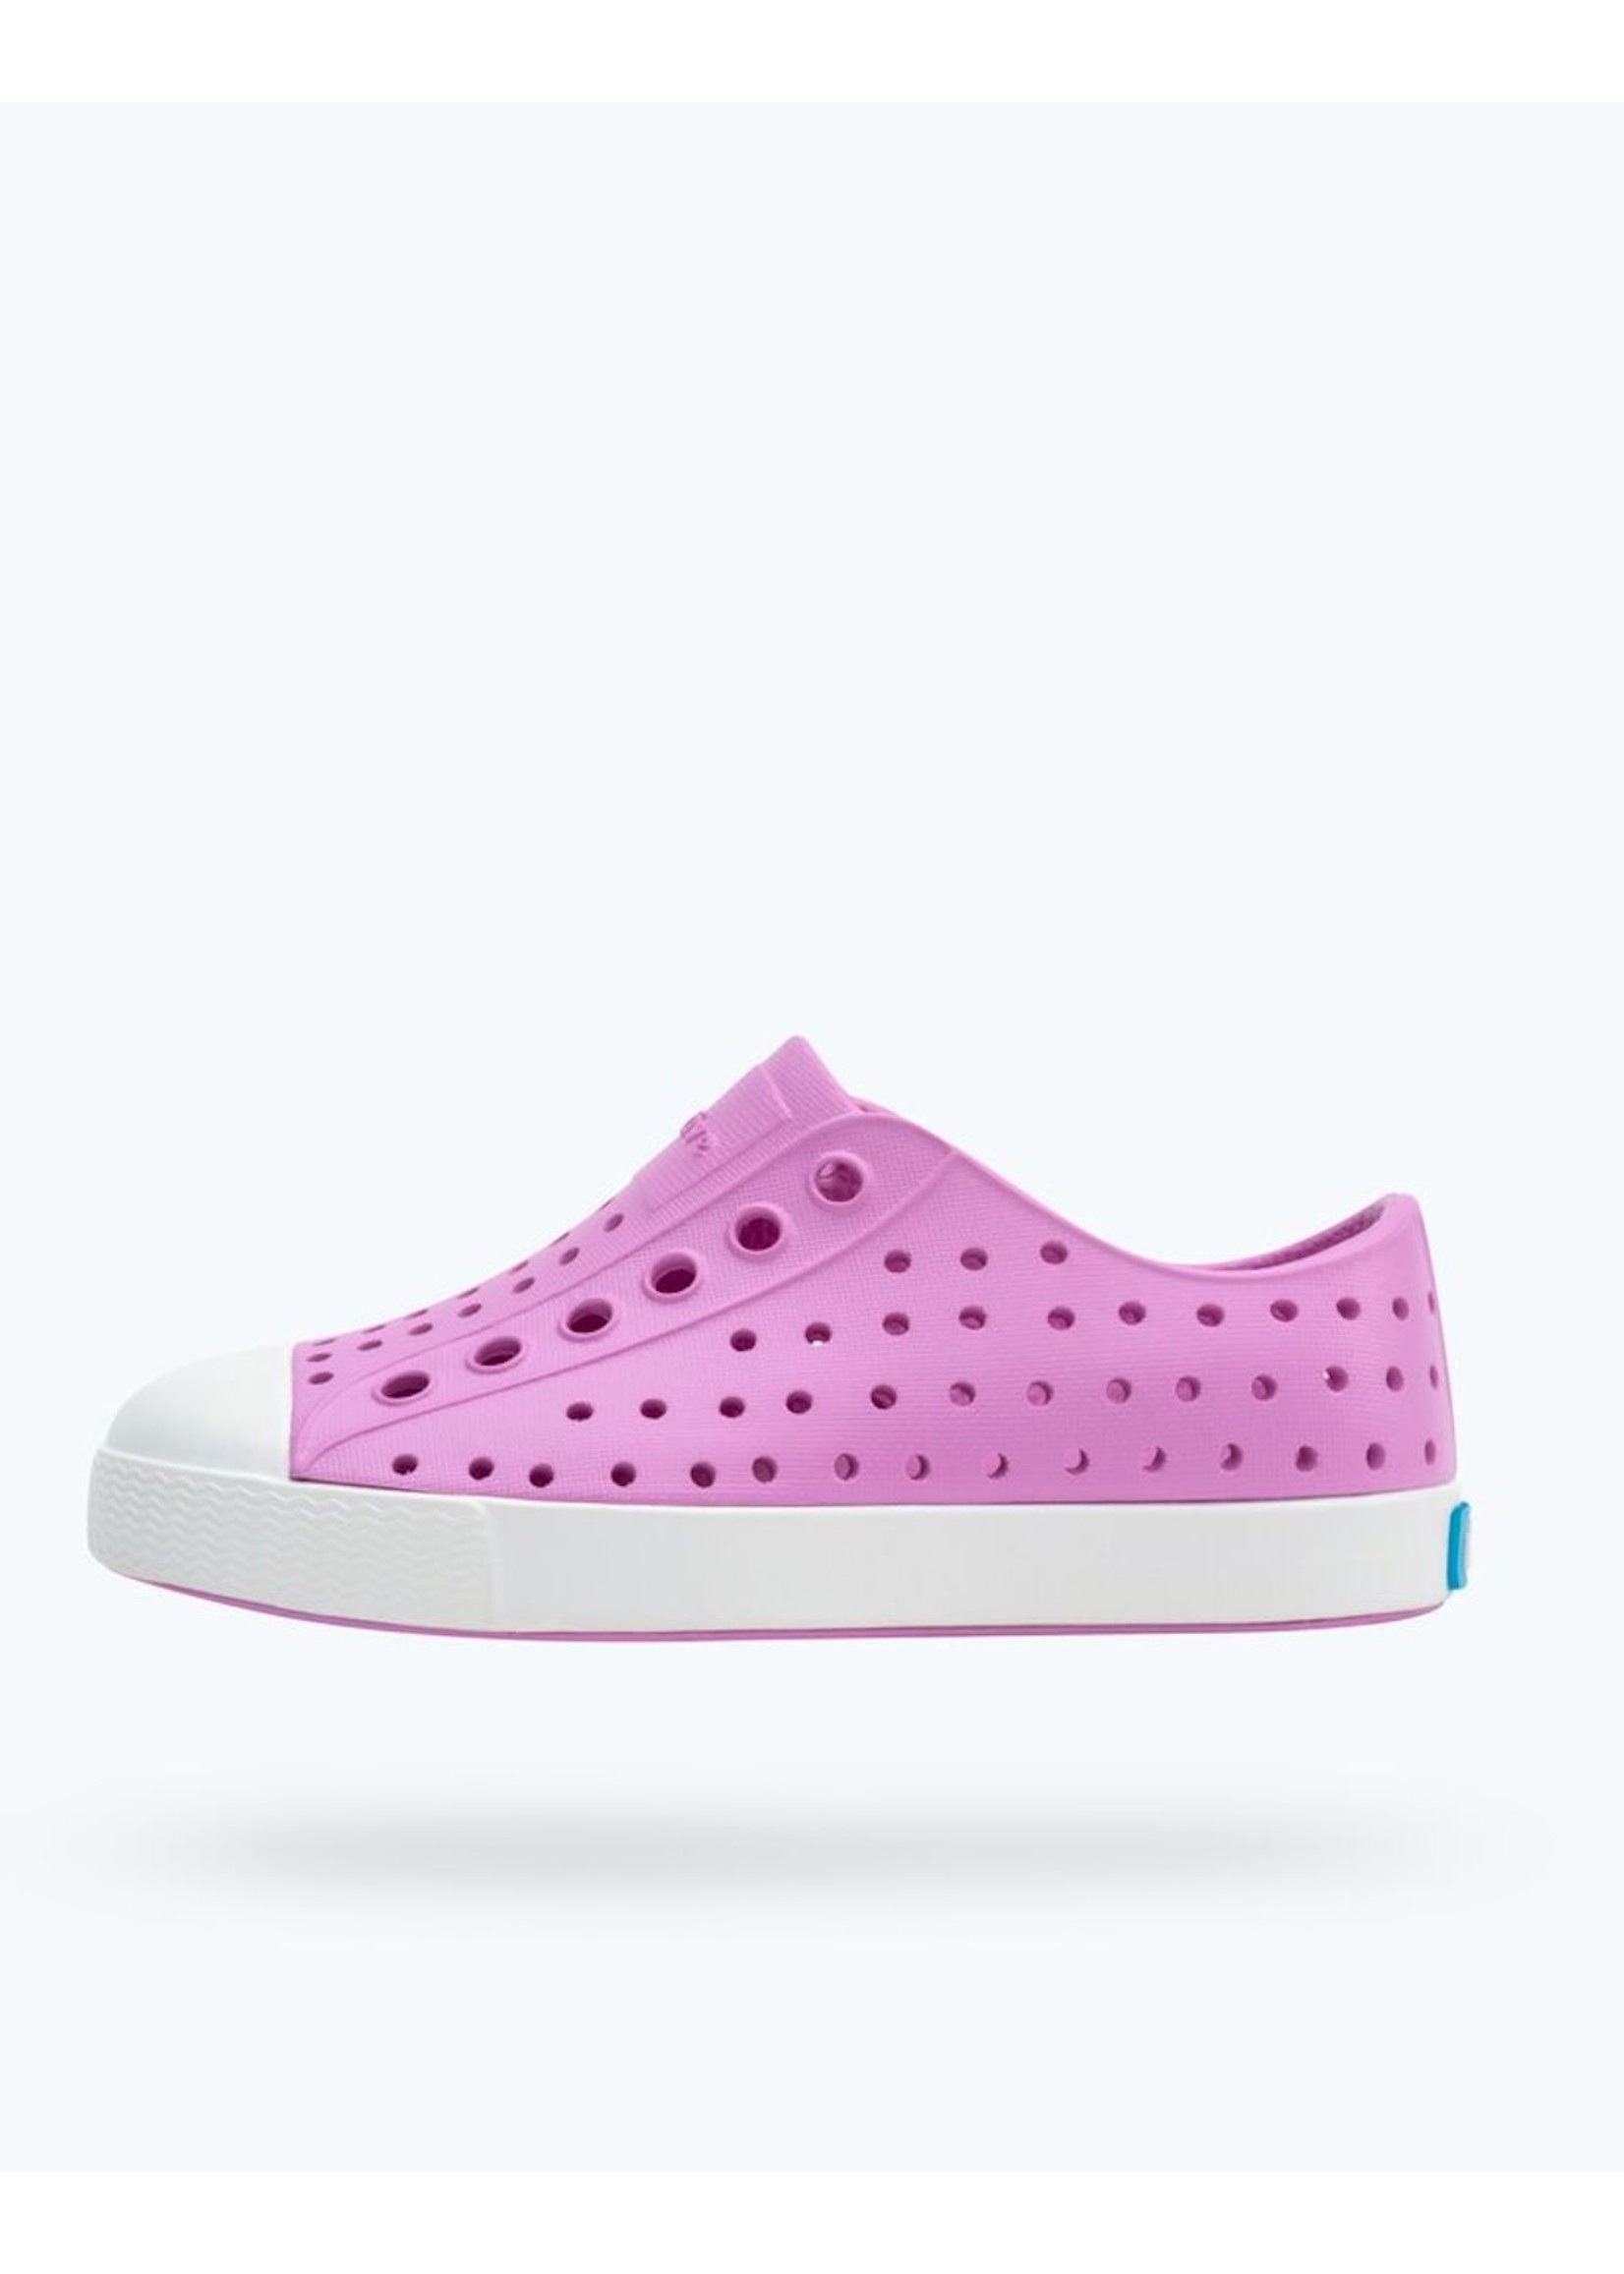 Native Shoes Native Shoes, Jefferson Youth/Junior || Winterberry Pink/ Shell White